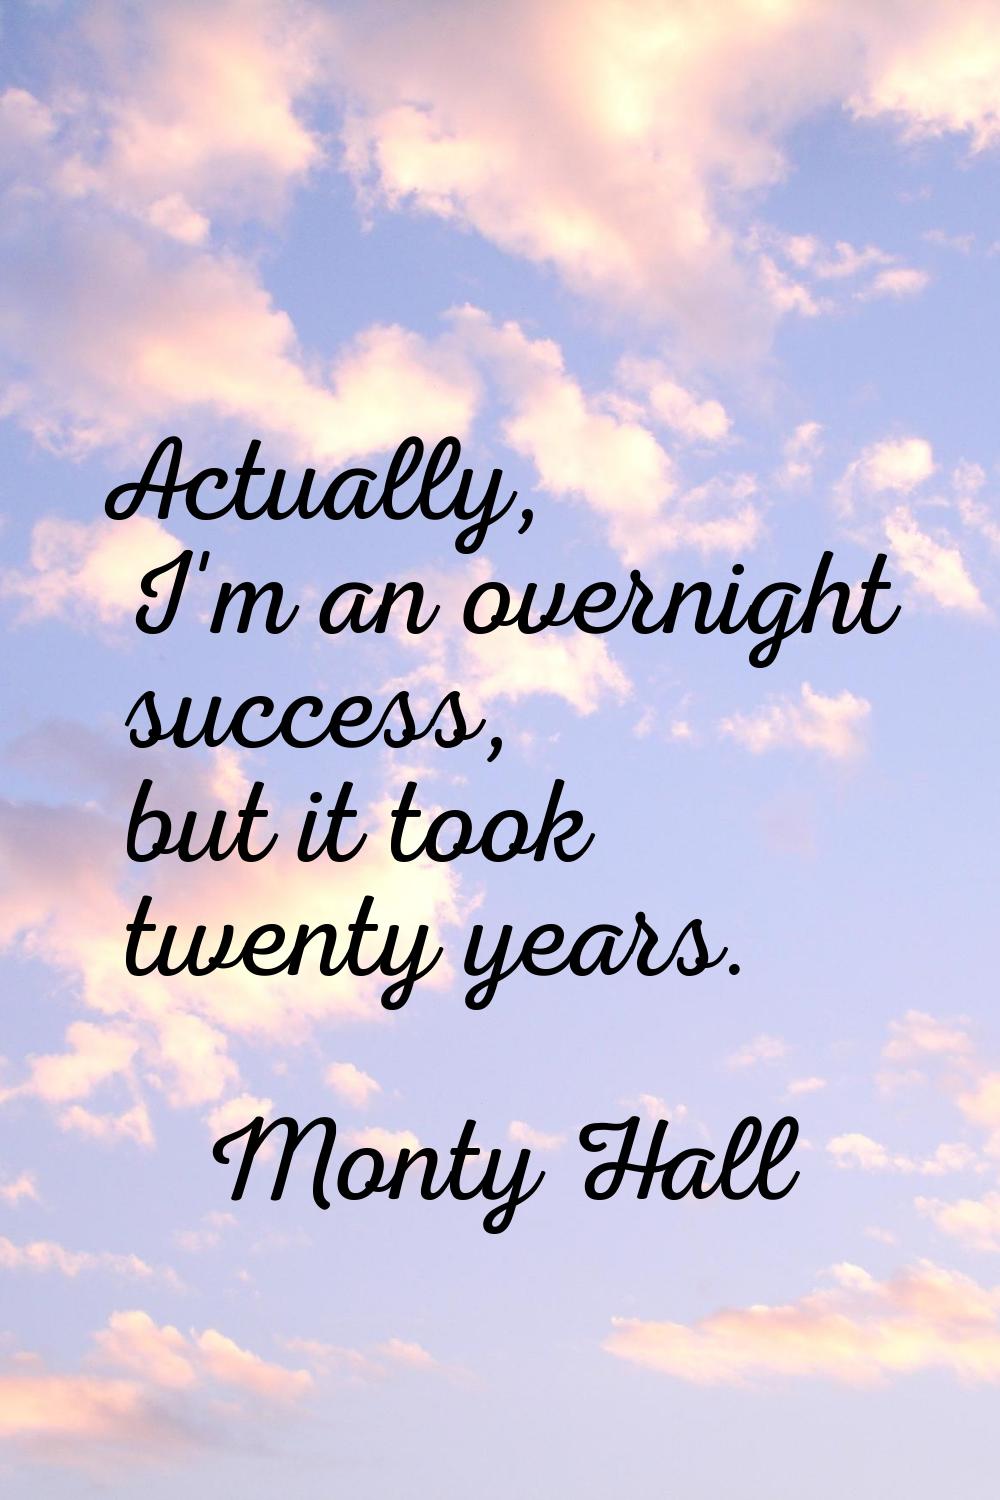 Actually, I'm an overnight success, but it took twenty years.